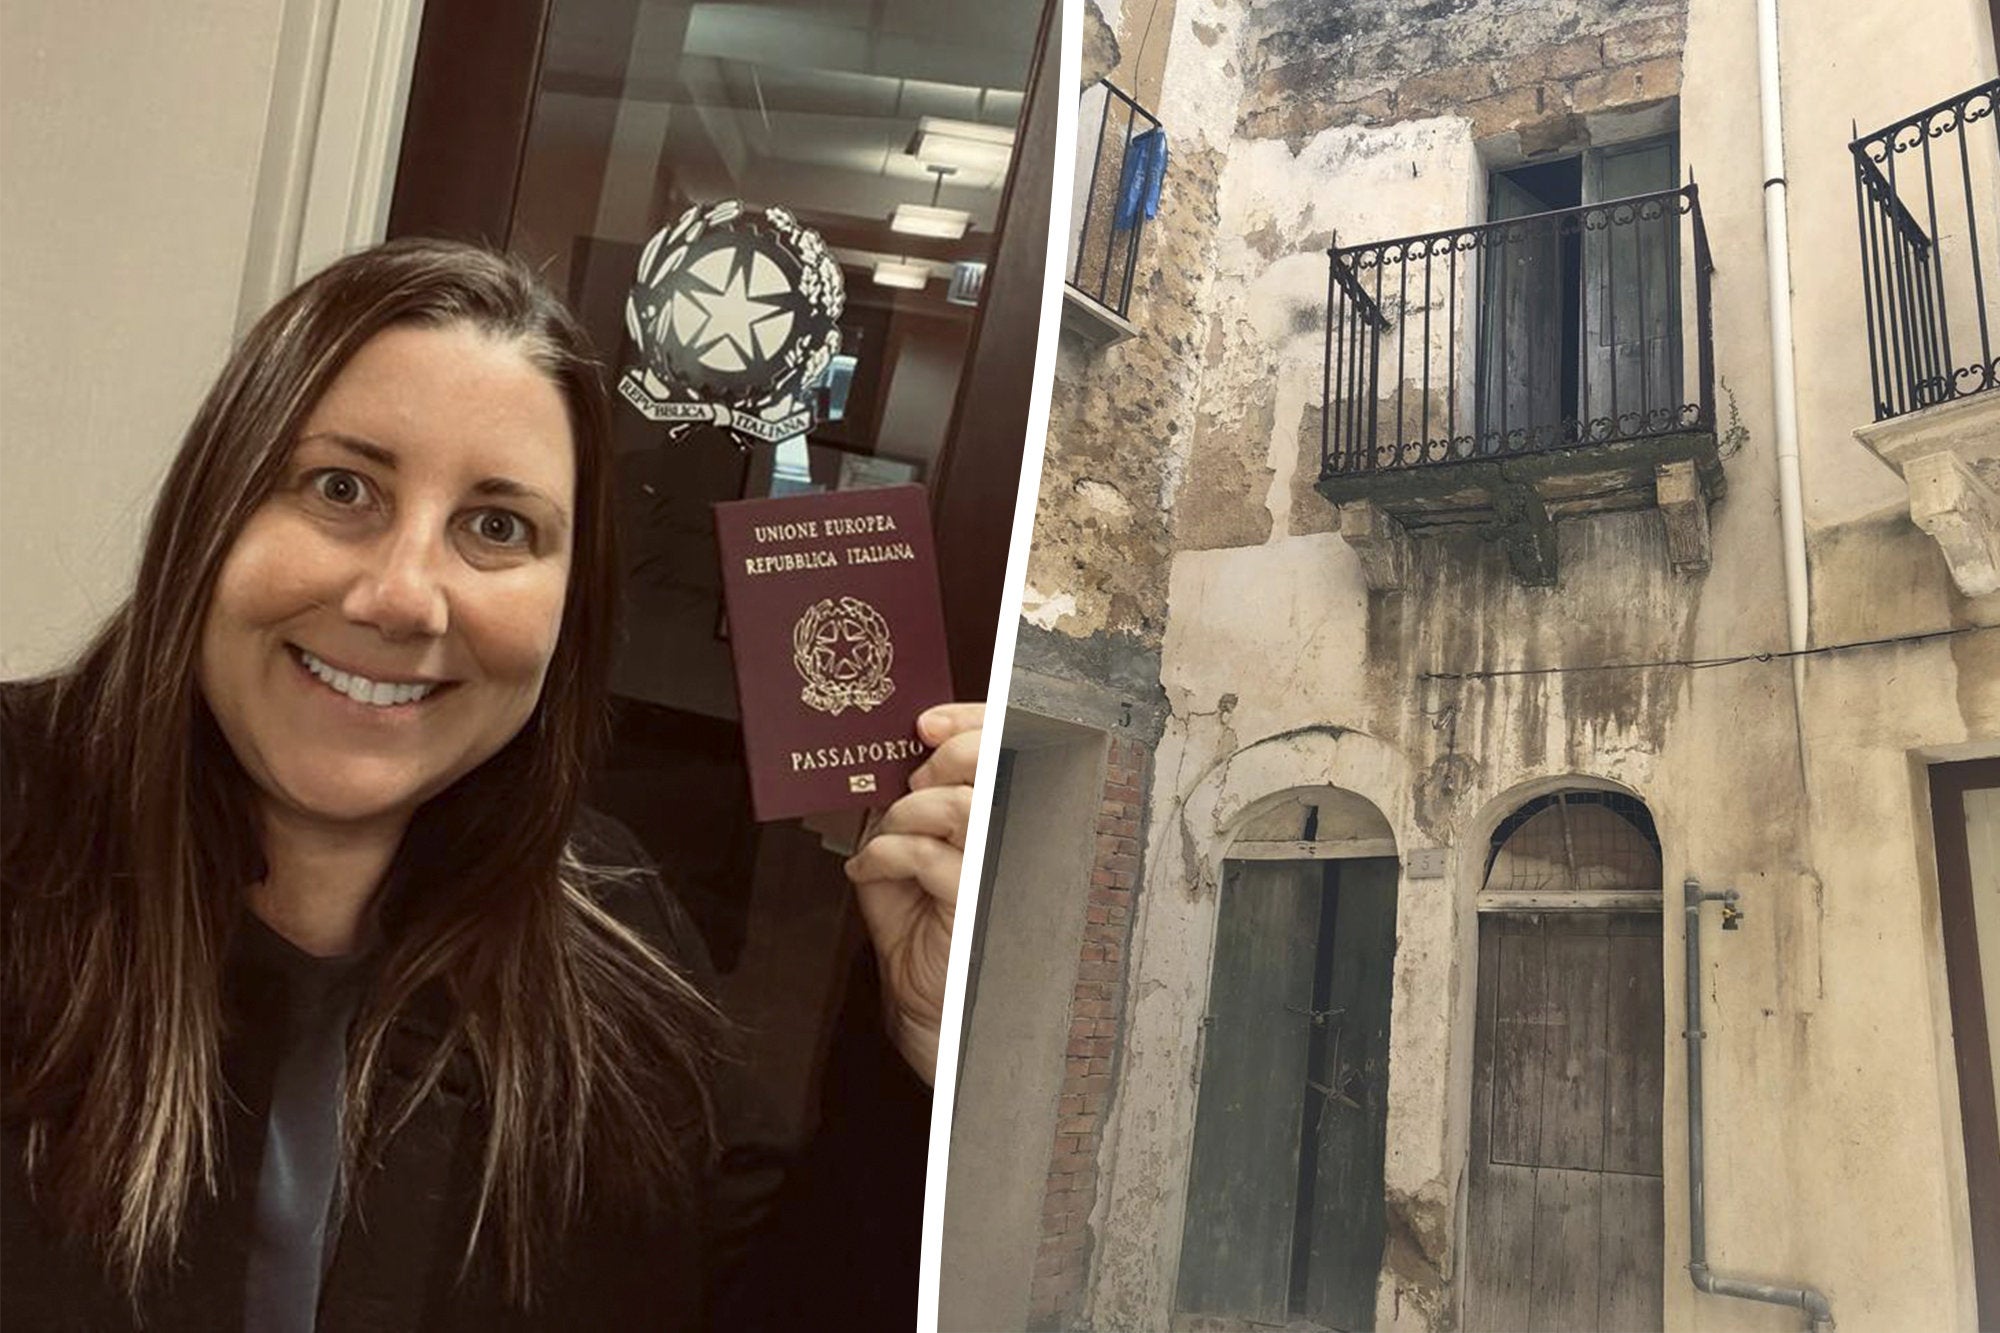 Meredith Tabbone, 43, heard councils in rural Sicily were auctioning off abandoned houses with a one euro starting bid in a bid to regenerate the village